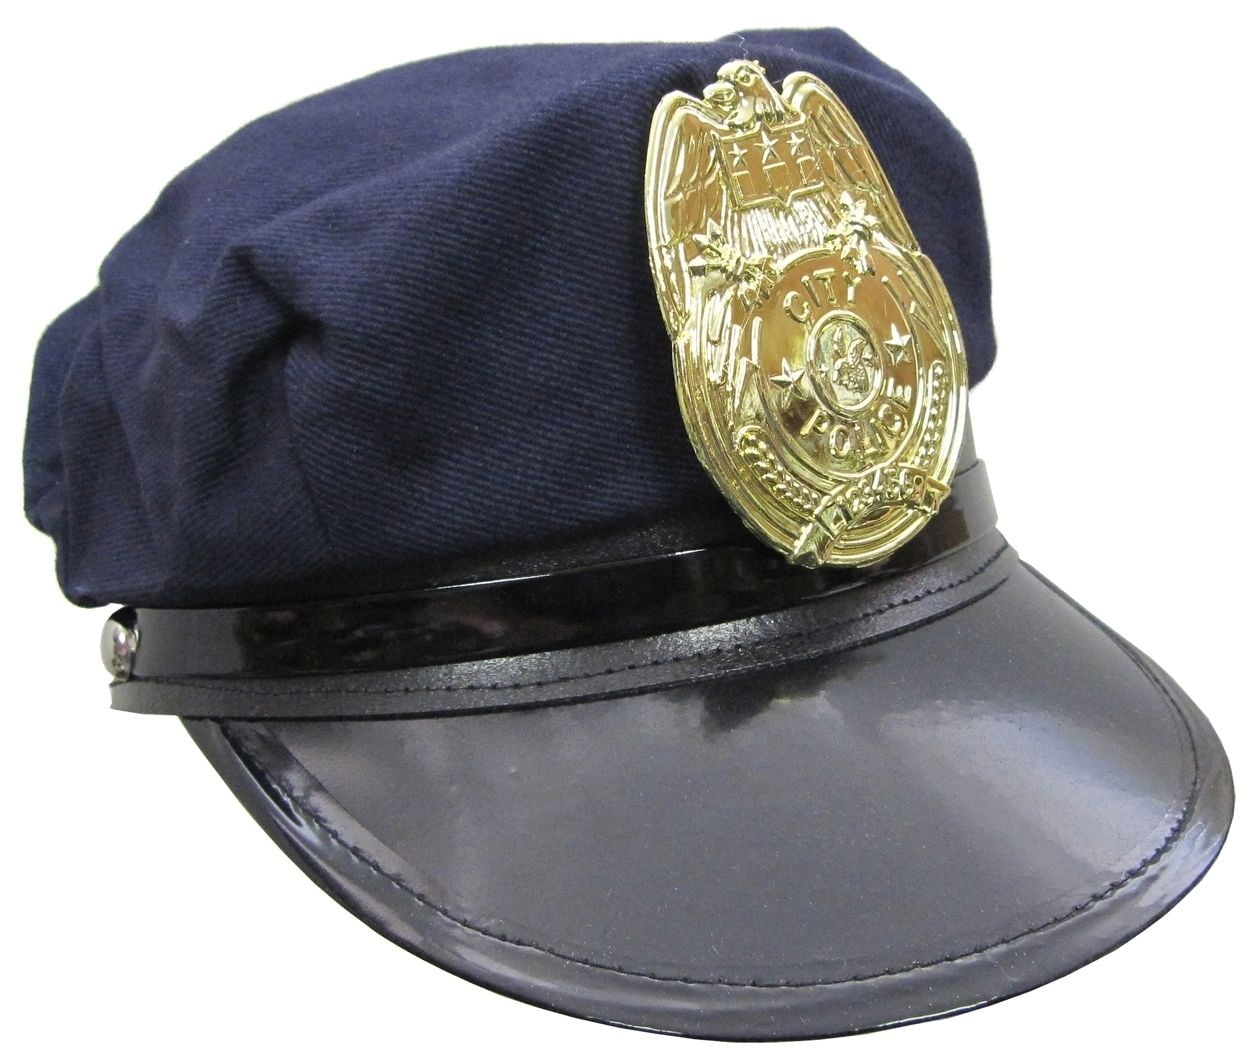 SATINIOR 2 Pieces Cop Captain Hat Black Police Hat Police Officer Costume Accessories for Funny Party 